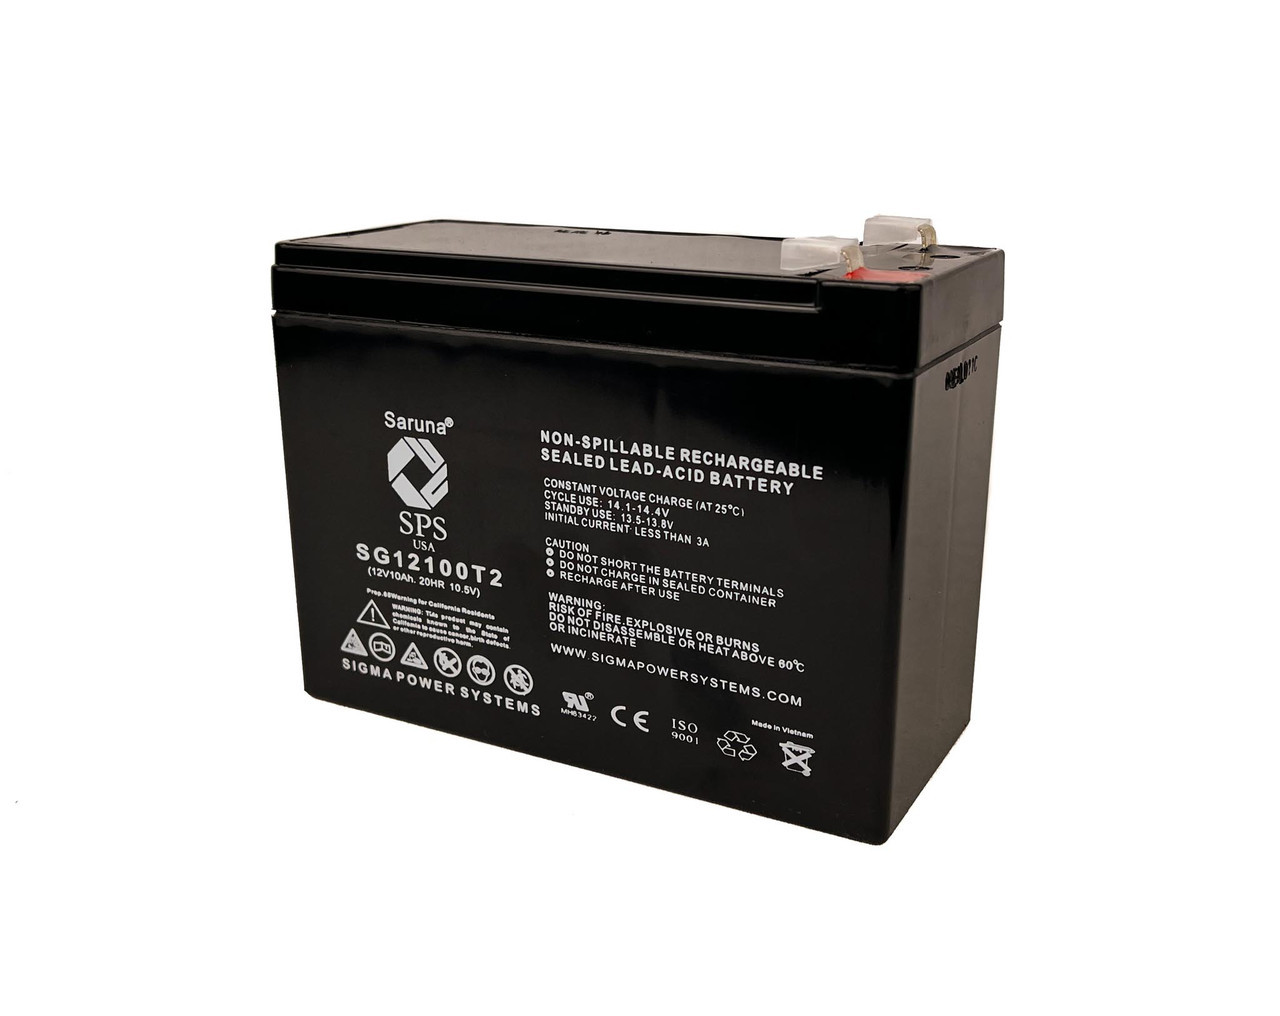 Raion Power 12V 10Ah Non-Spillable Replacement Rechargebale Battery for Nair NR12-10H